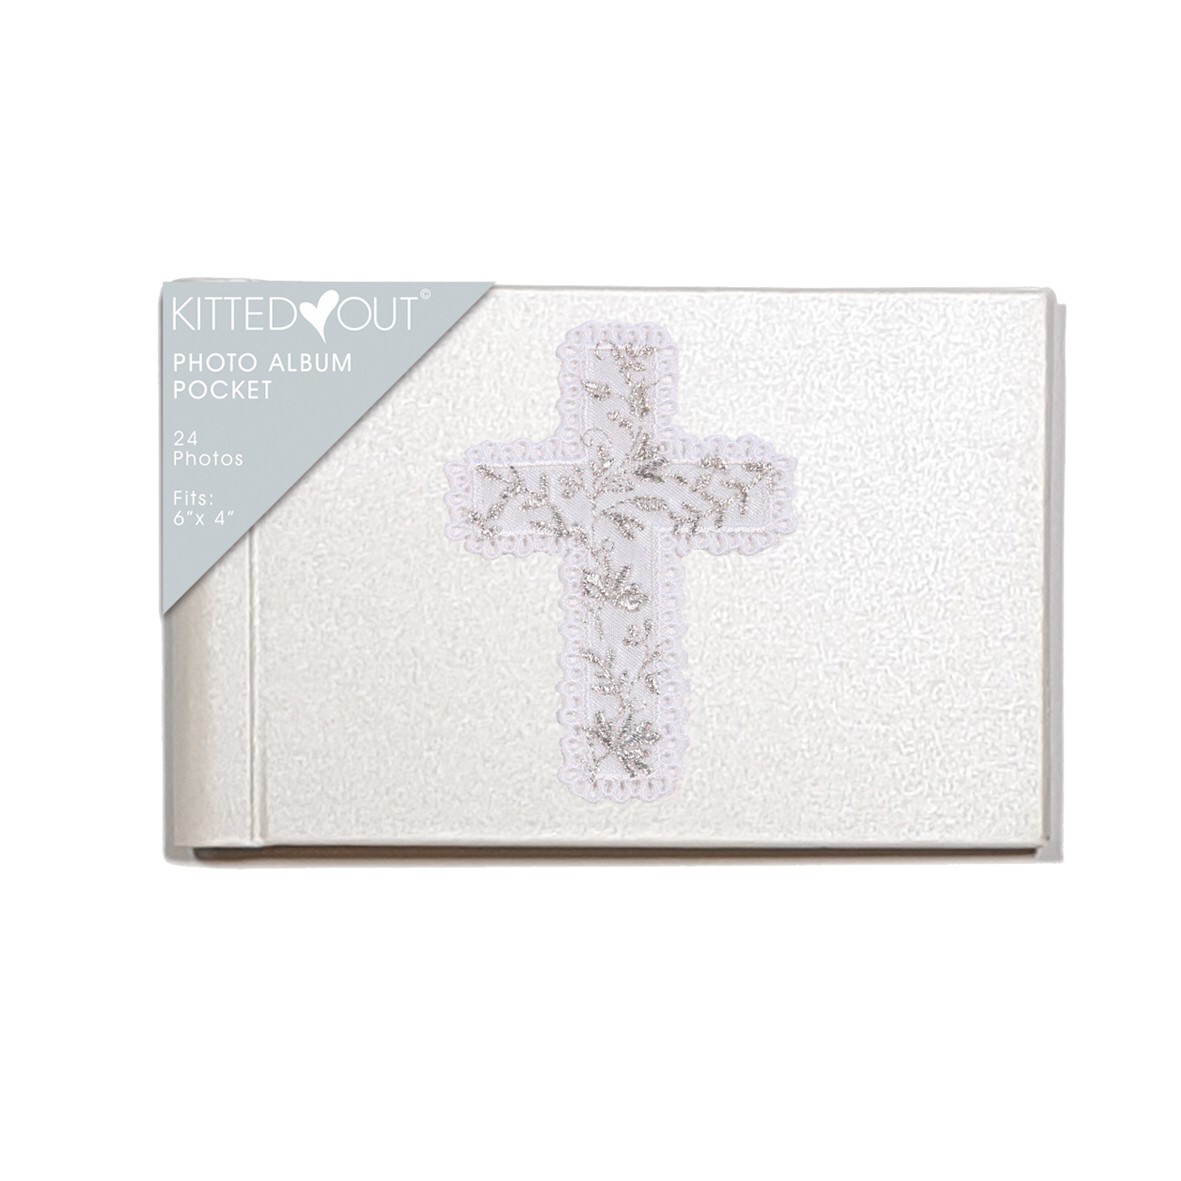 Kitted Out Cross 6 x 4” Pocket Photo Album